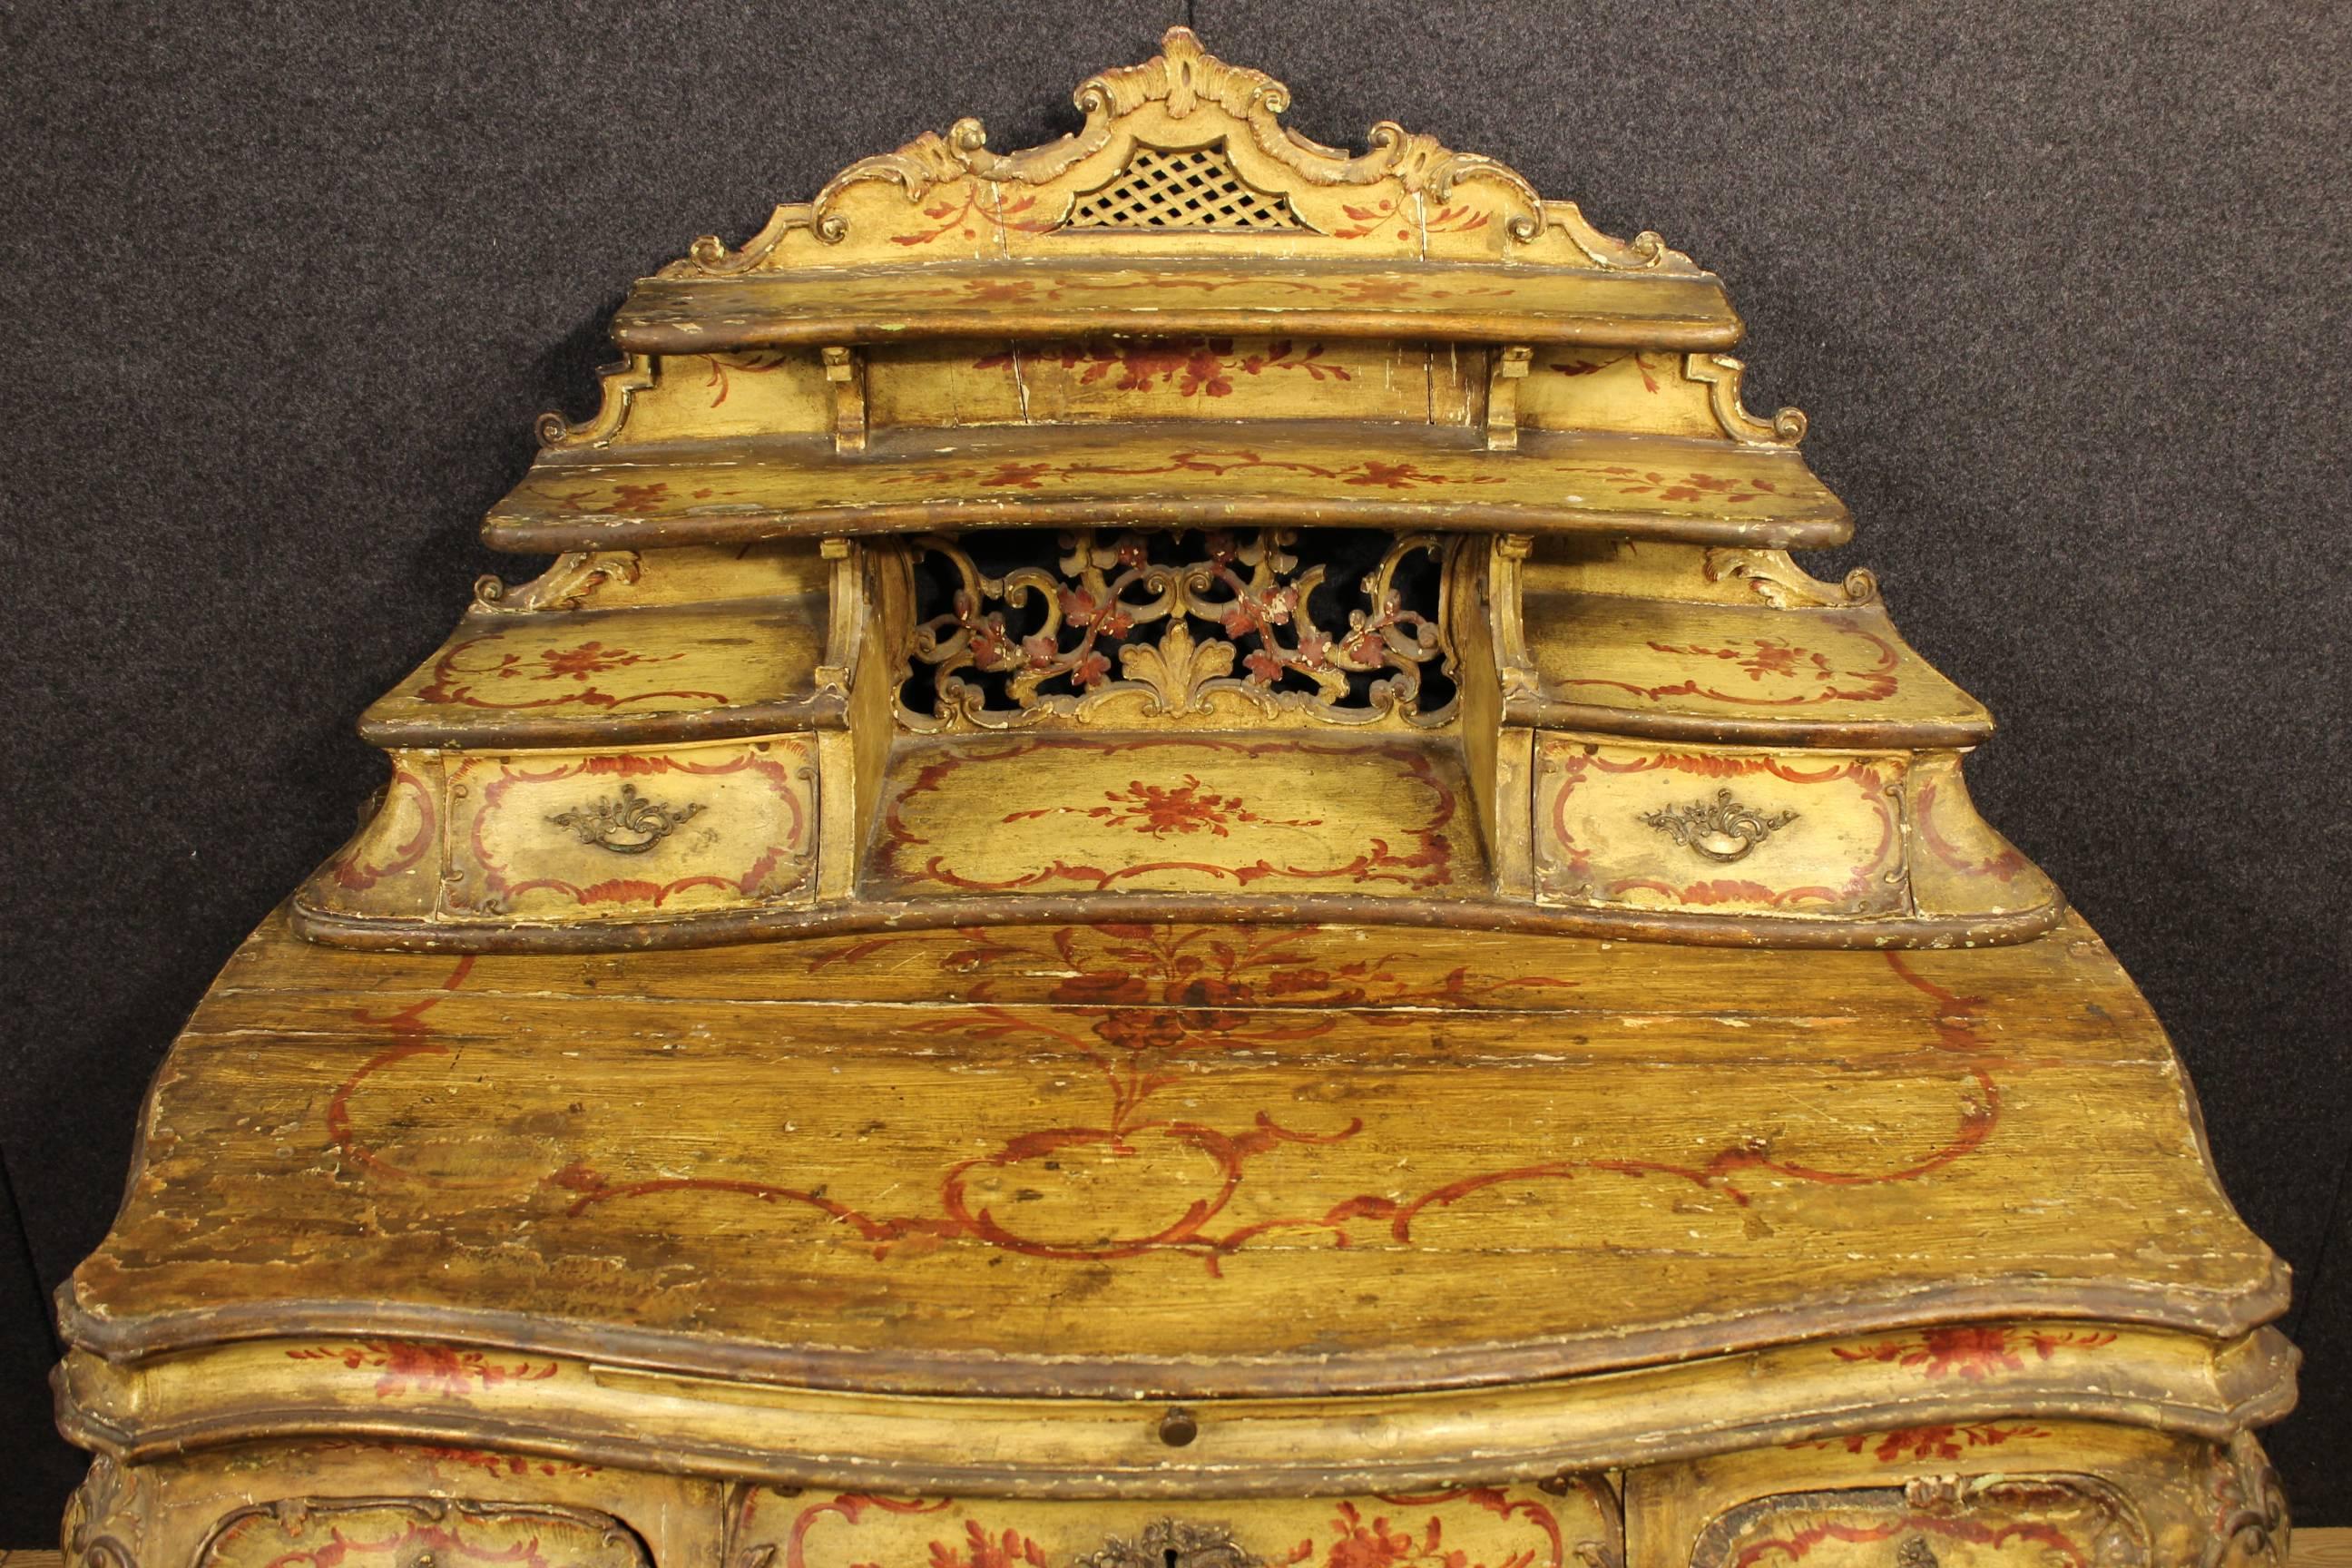 Spectacular Venetian writing desk of the late 19th century. Furniture ornately carved lacquered and painted with floral motifs of great taste, in fabulous patina. Desk finished from center built in two separable bodies (writing and shelf) of amazing